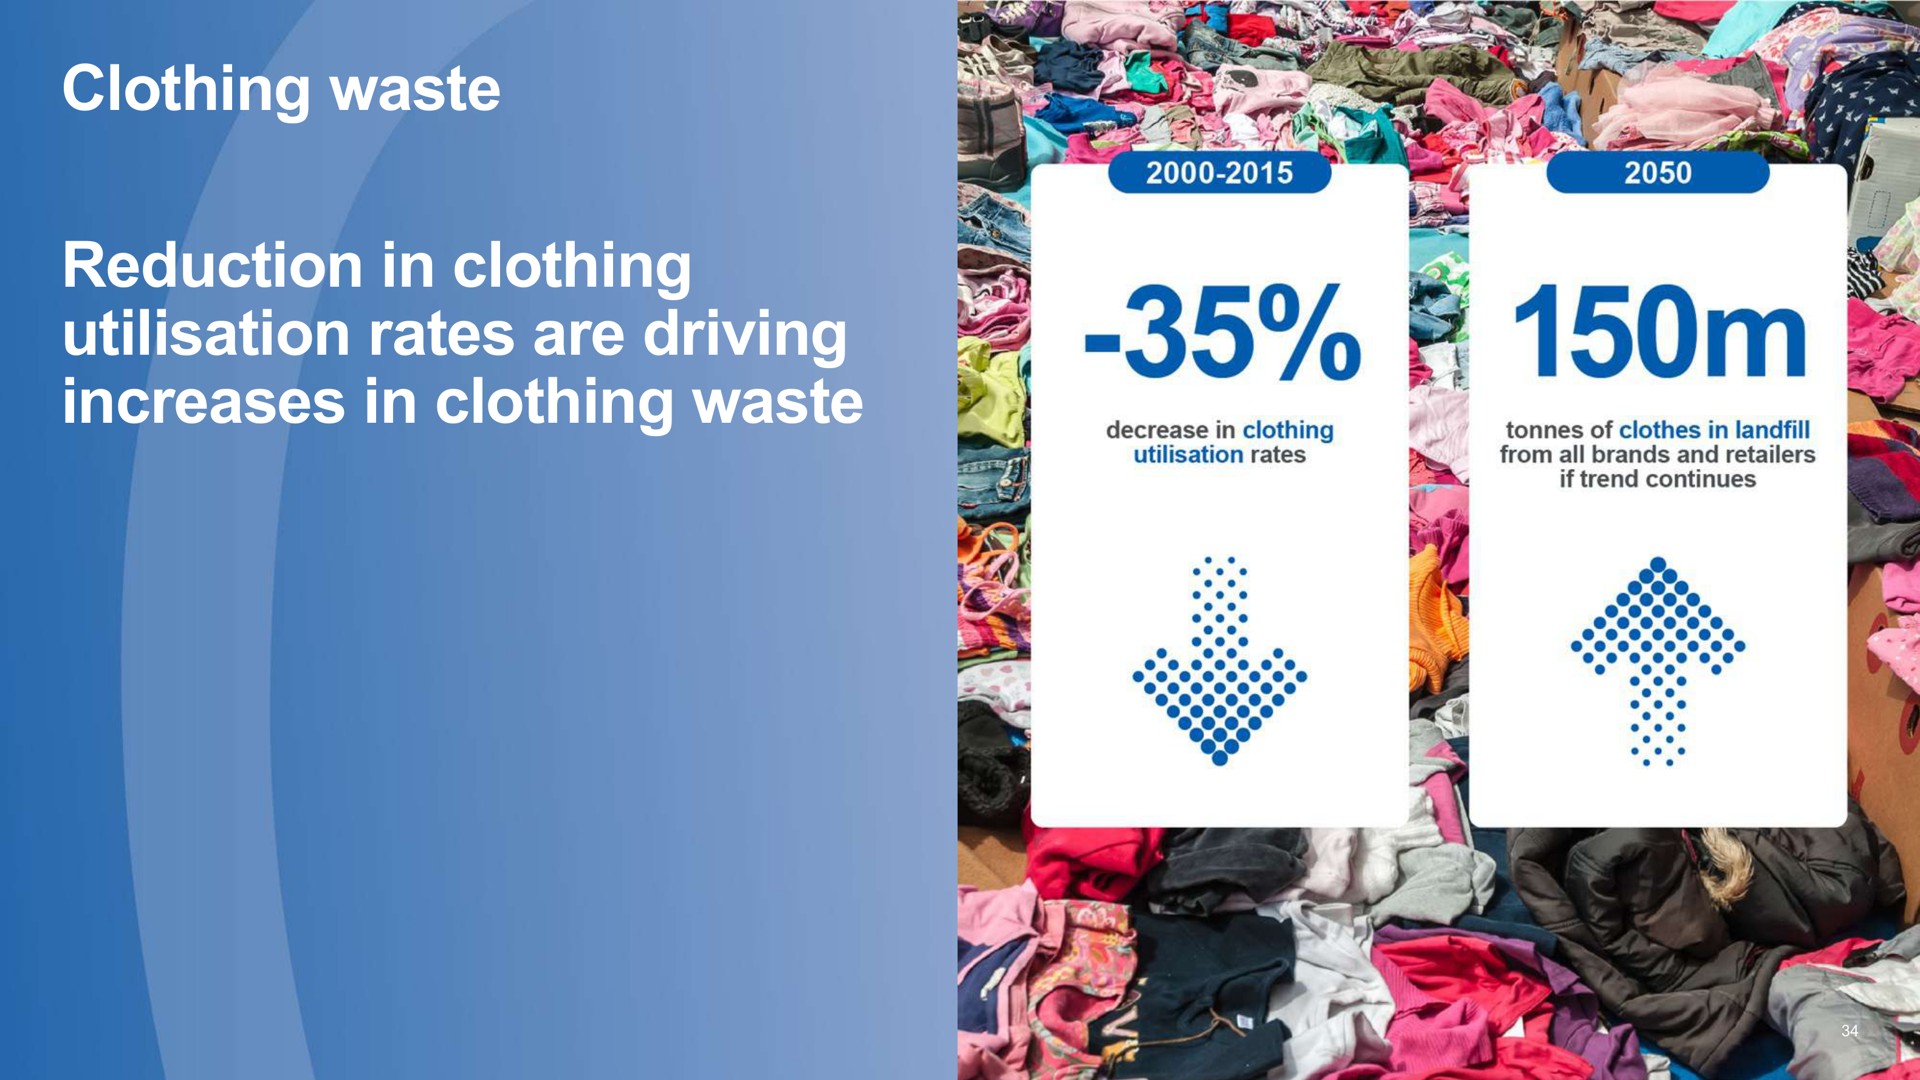 clothing waste reduction in clothing rates are driving increases in clothing waste | Associated British Foods